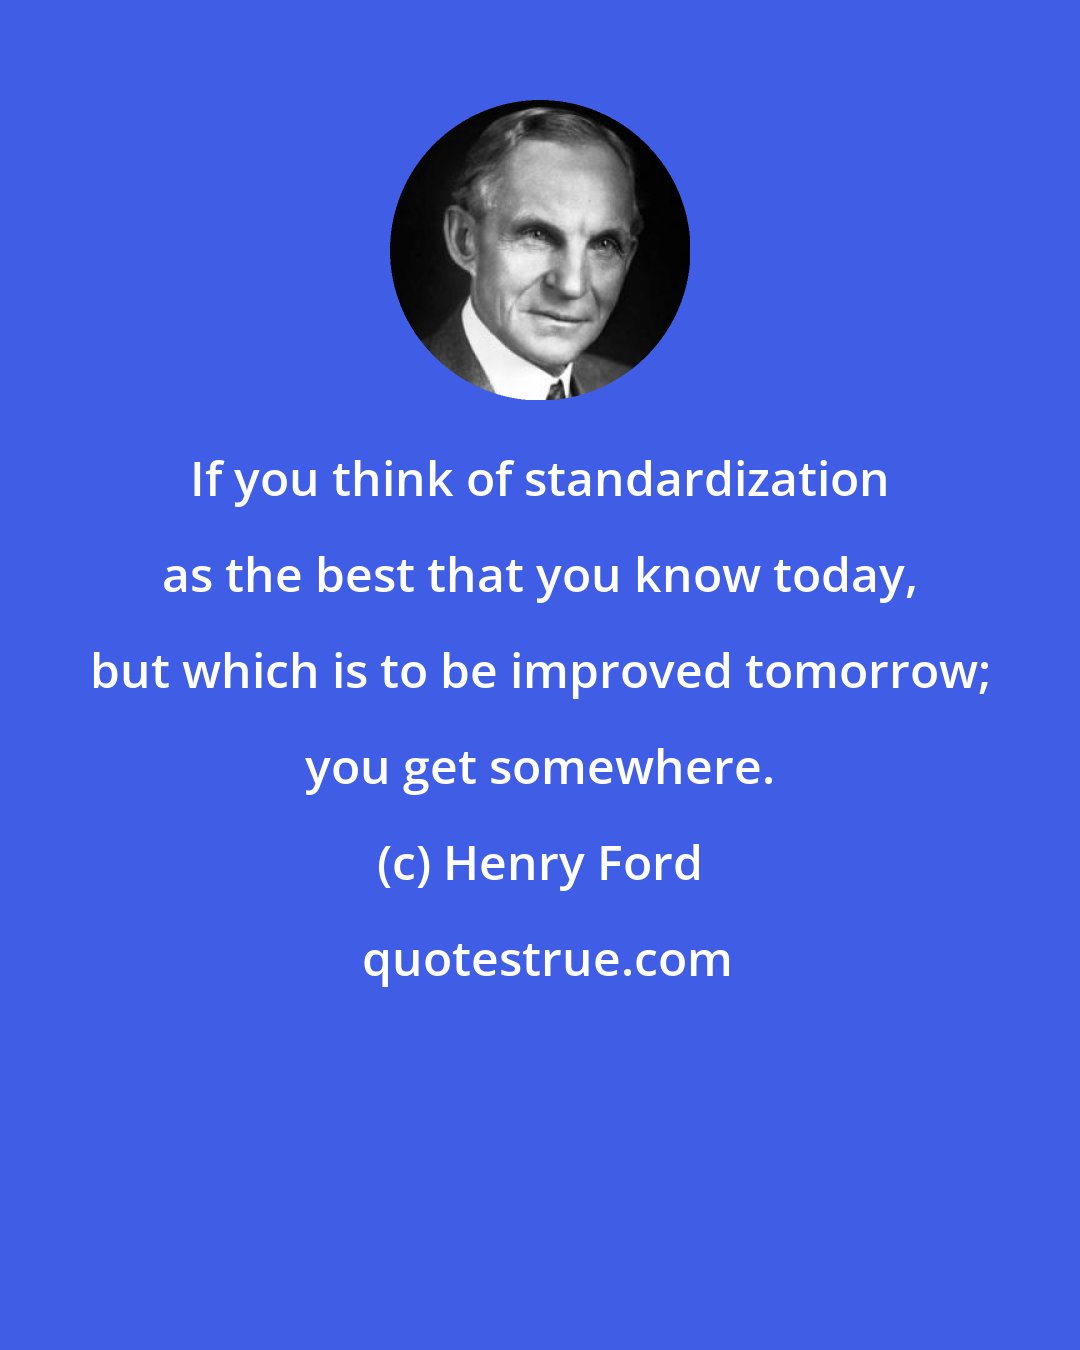 Henry Ford: If you think of standardization as the best that you know today, but which is to be improved tomorrow; you get somewhere.